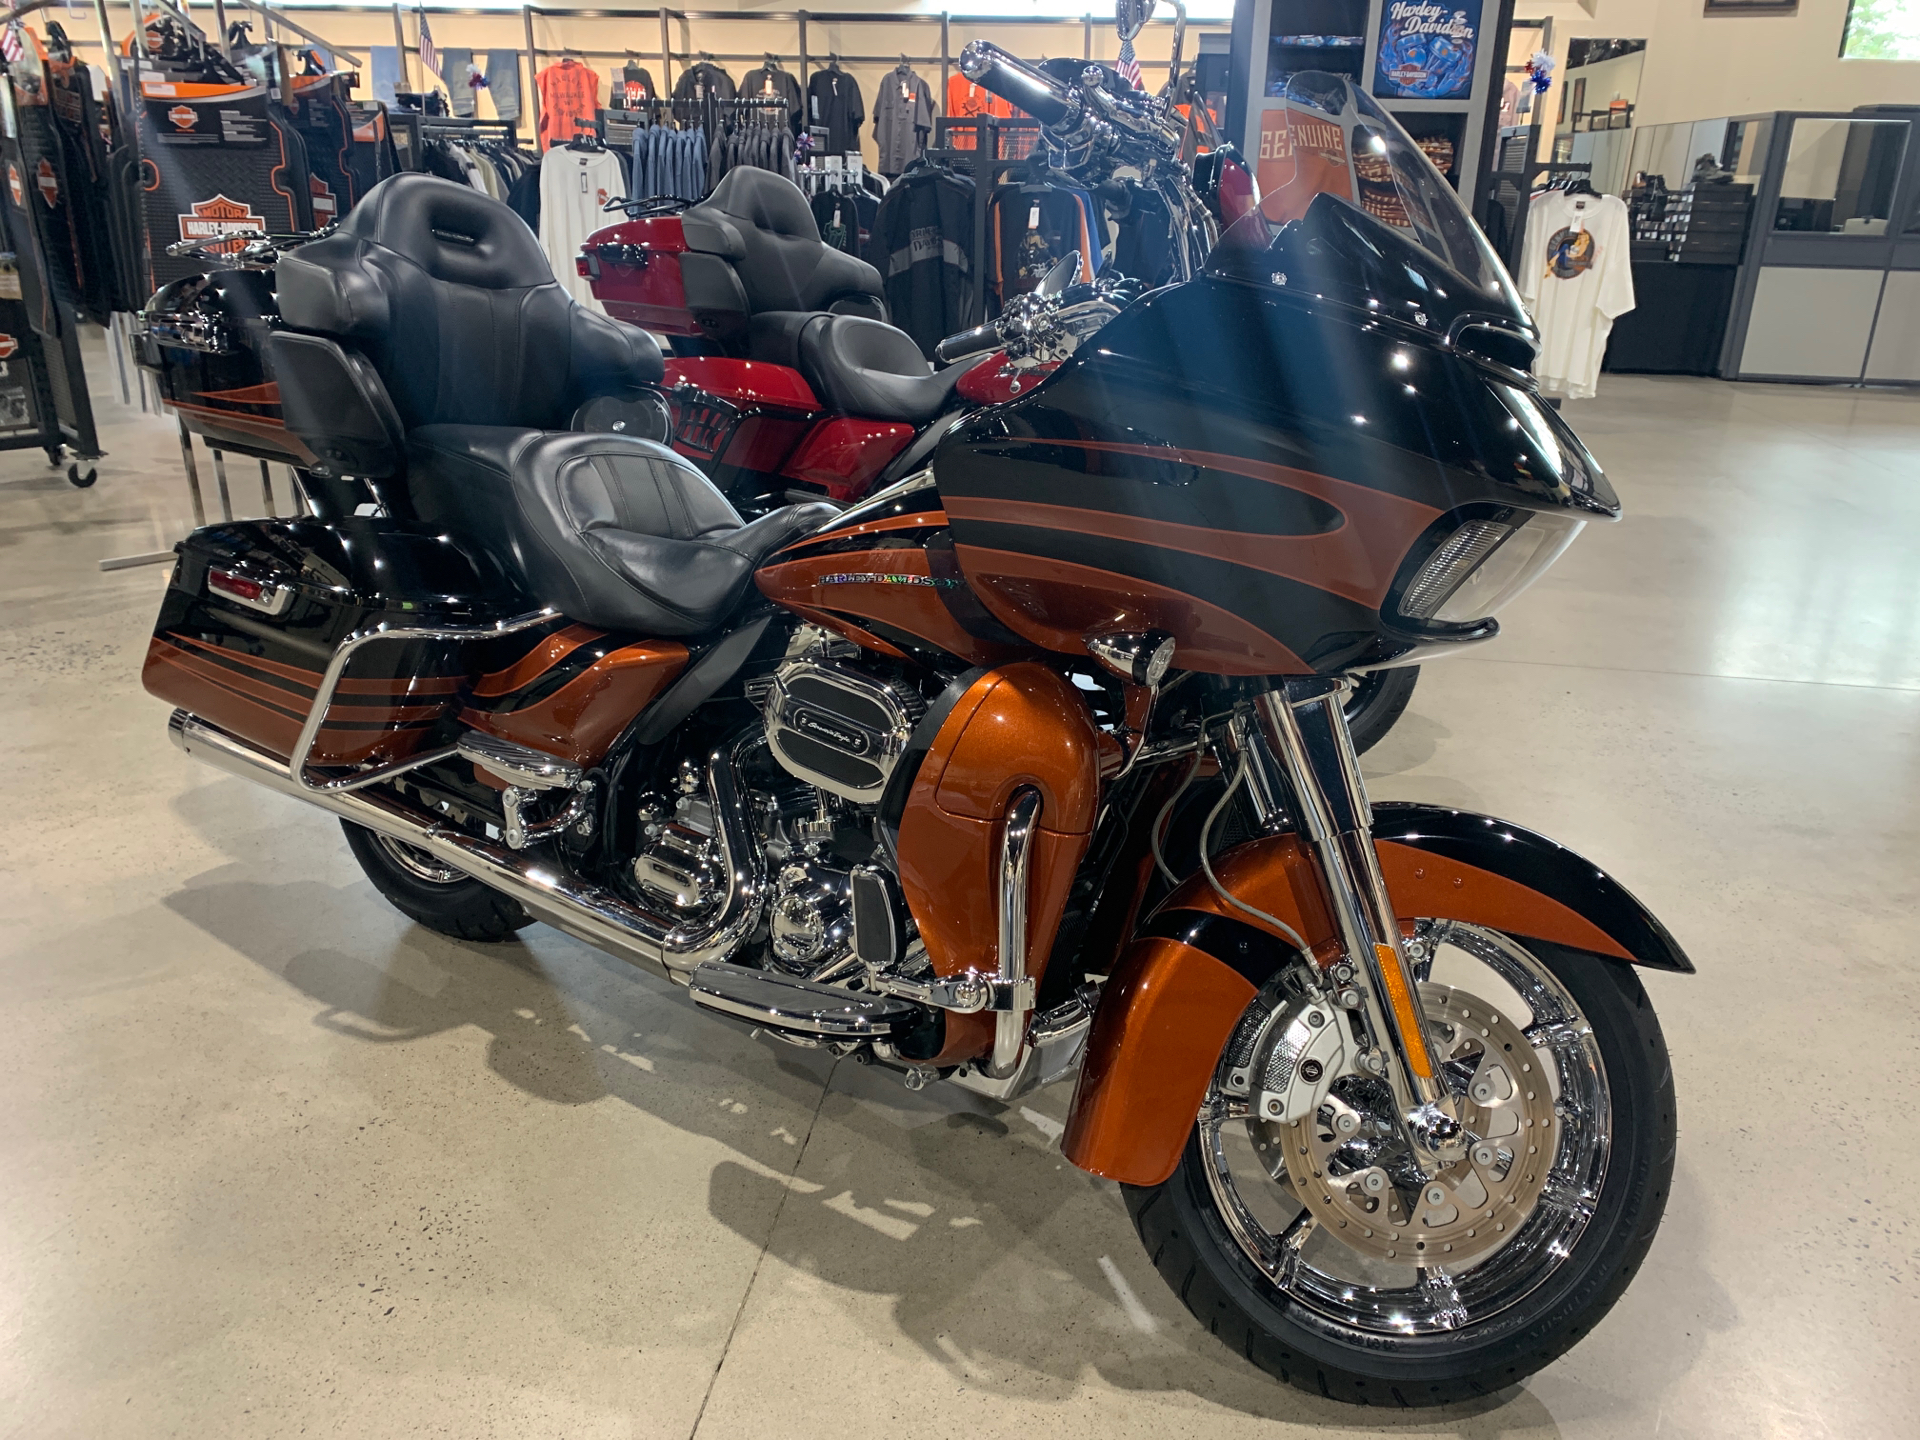 Used 2015 Harley Davidson Cvo Road Glide Ultra Carbon Dust Autumn Sunset Motorcycles In New York Mills Ny Mb618414a